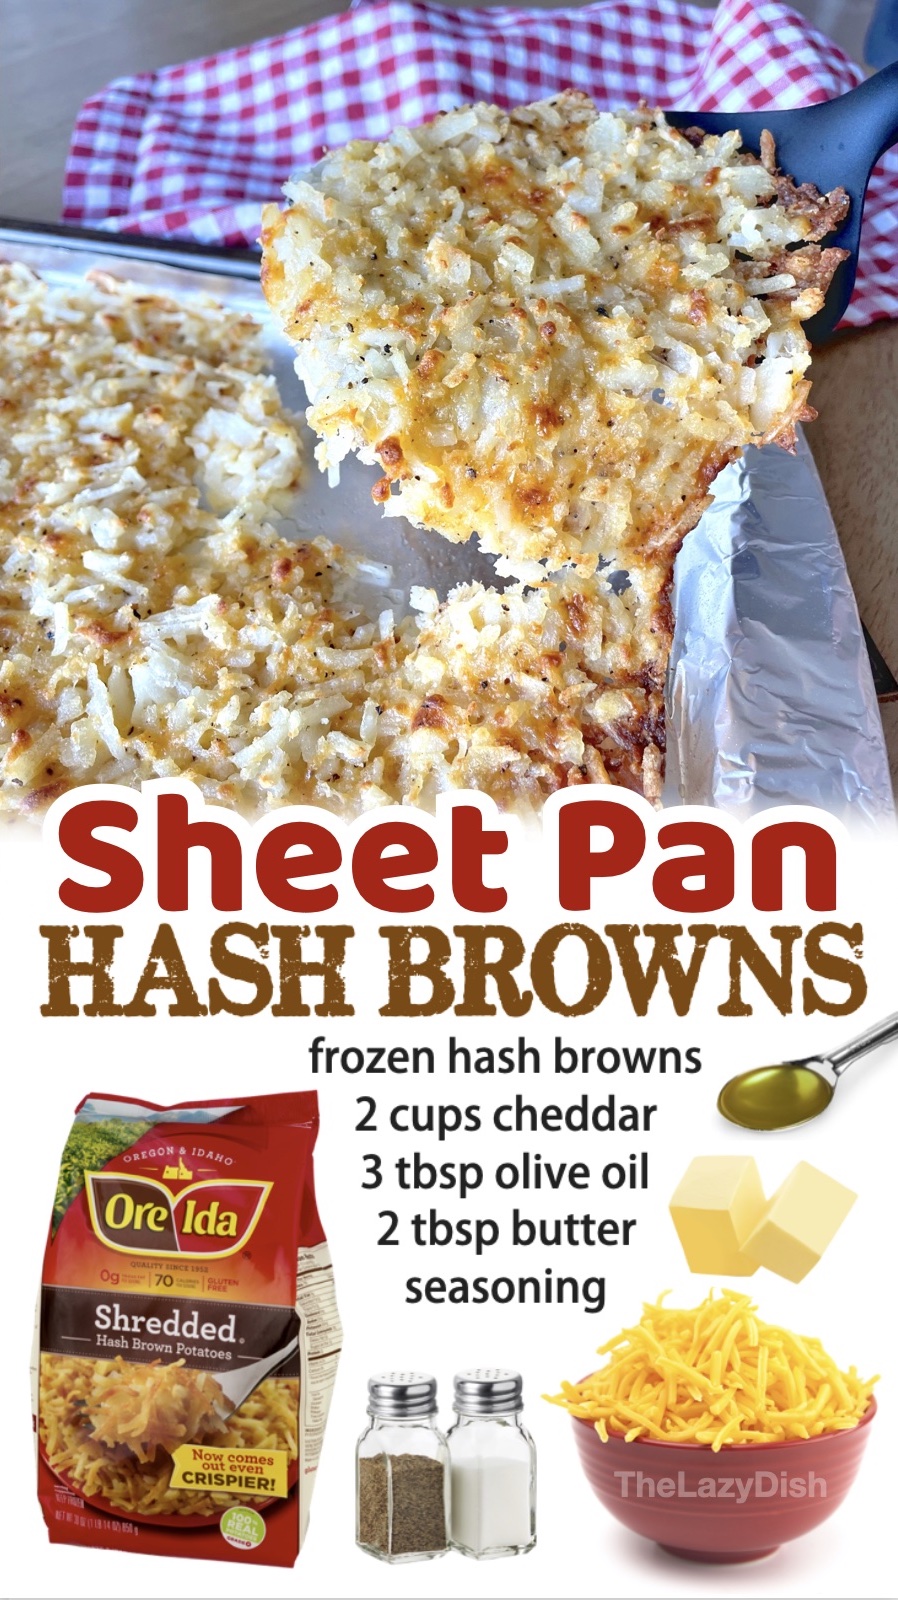 https://www.thelazydish.com/wp-content/uploads/2023/06/how-to-make-crispy-hash-browns-in-the-oven-1.jpg